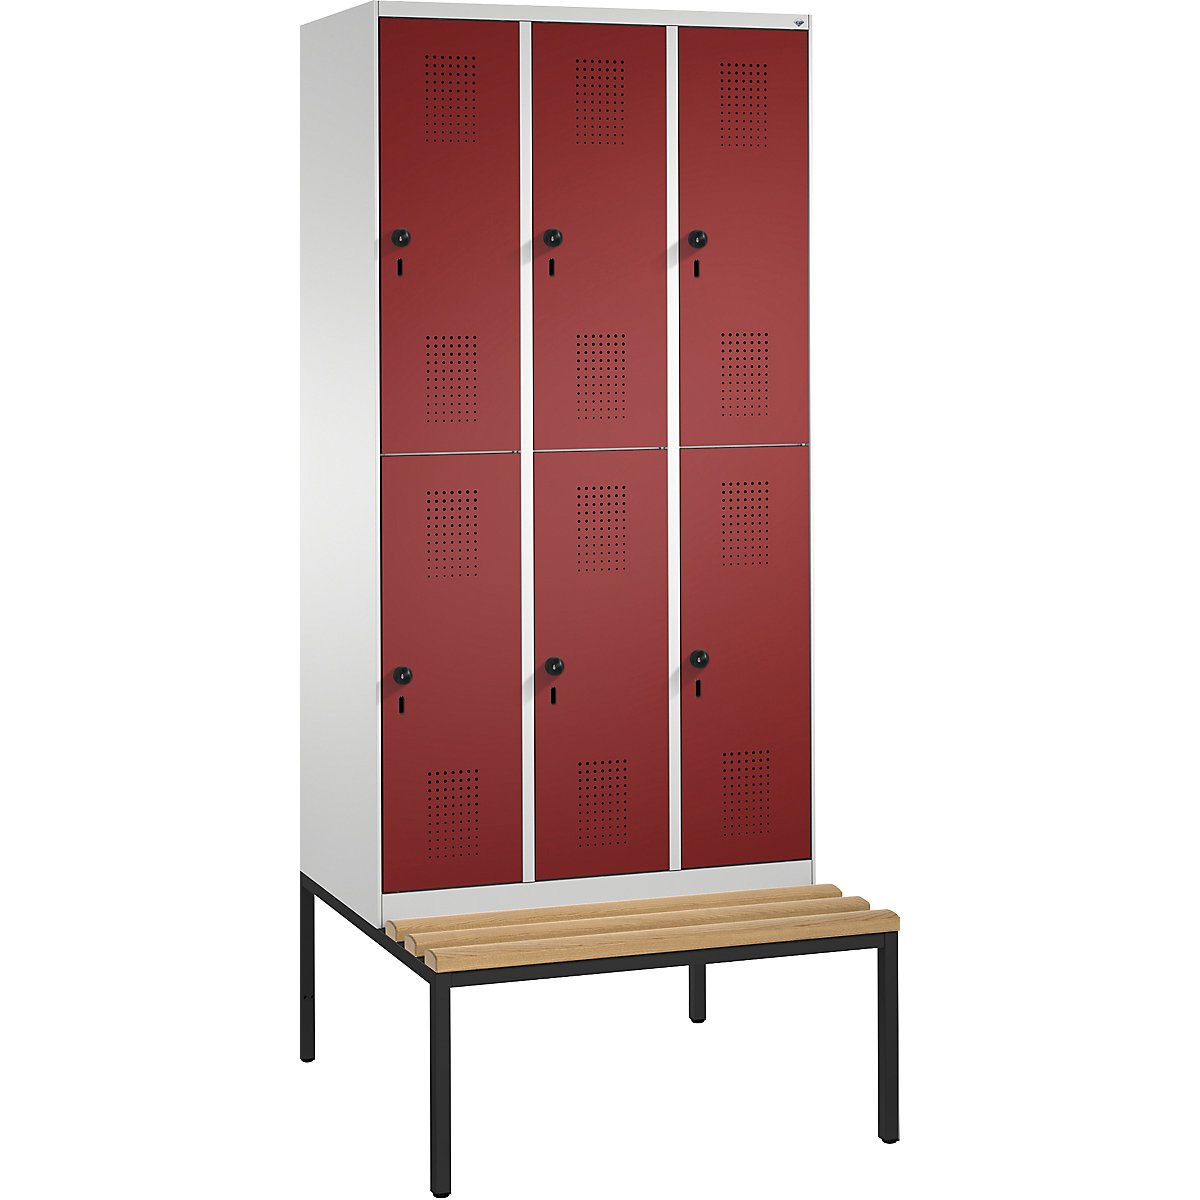 EVOLO cloakroom locker, double tier, with bench – C+P, 3 compartments, 2 shelf compartments each, compartment width 300 mm, light grey / ruby red-15